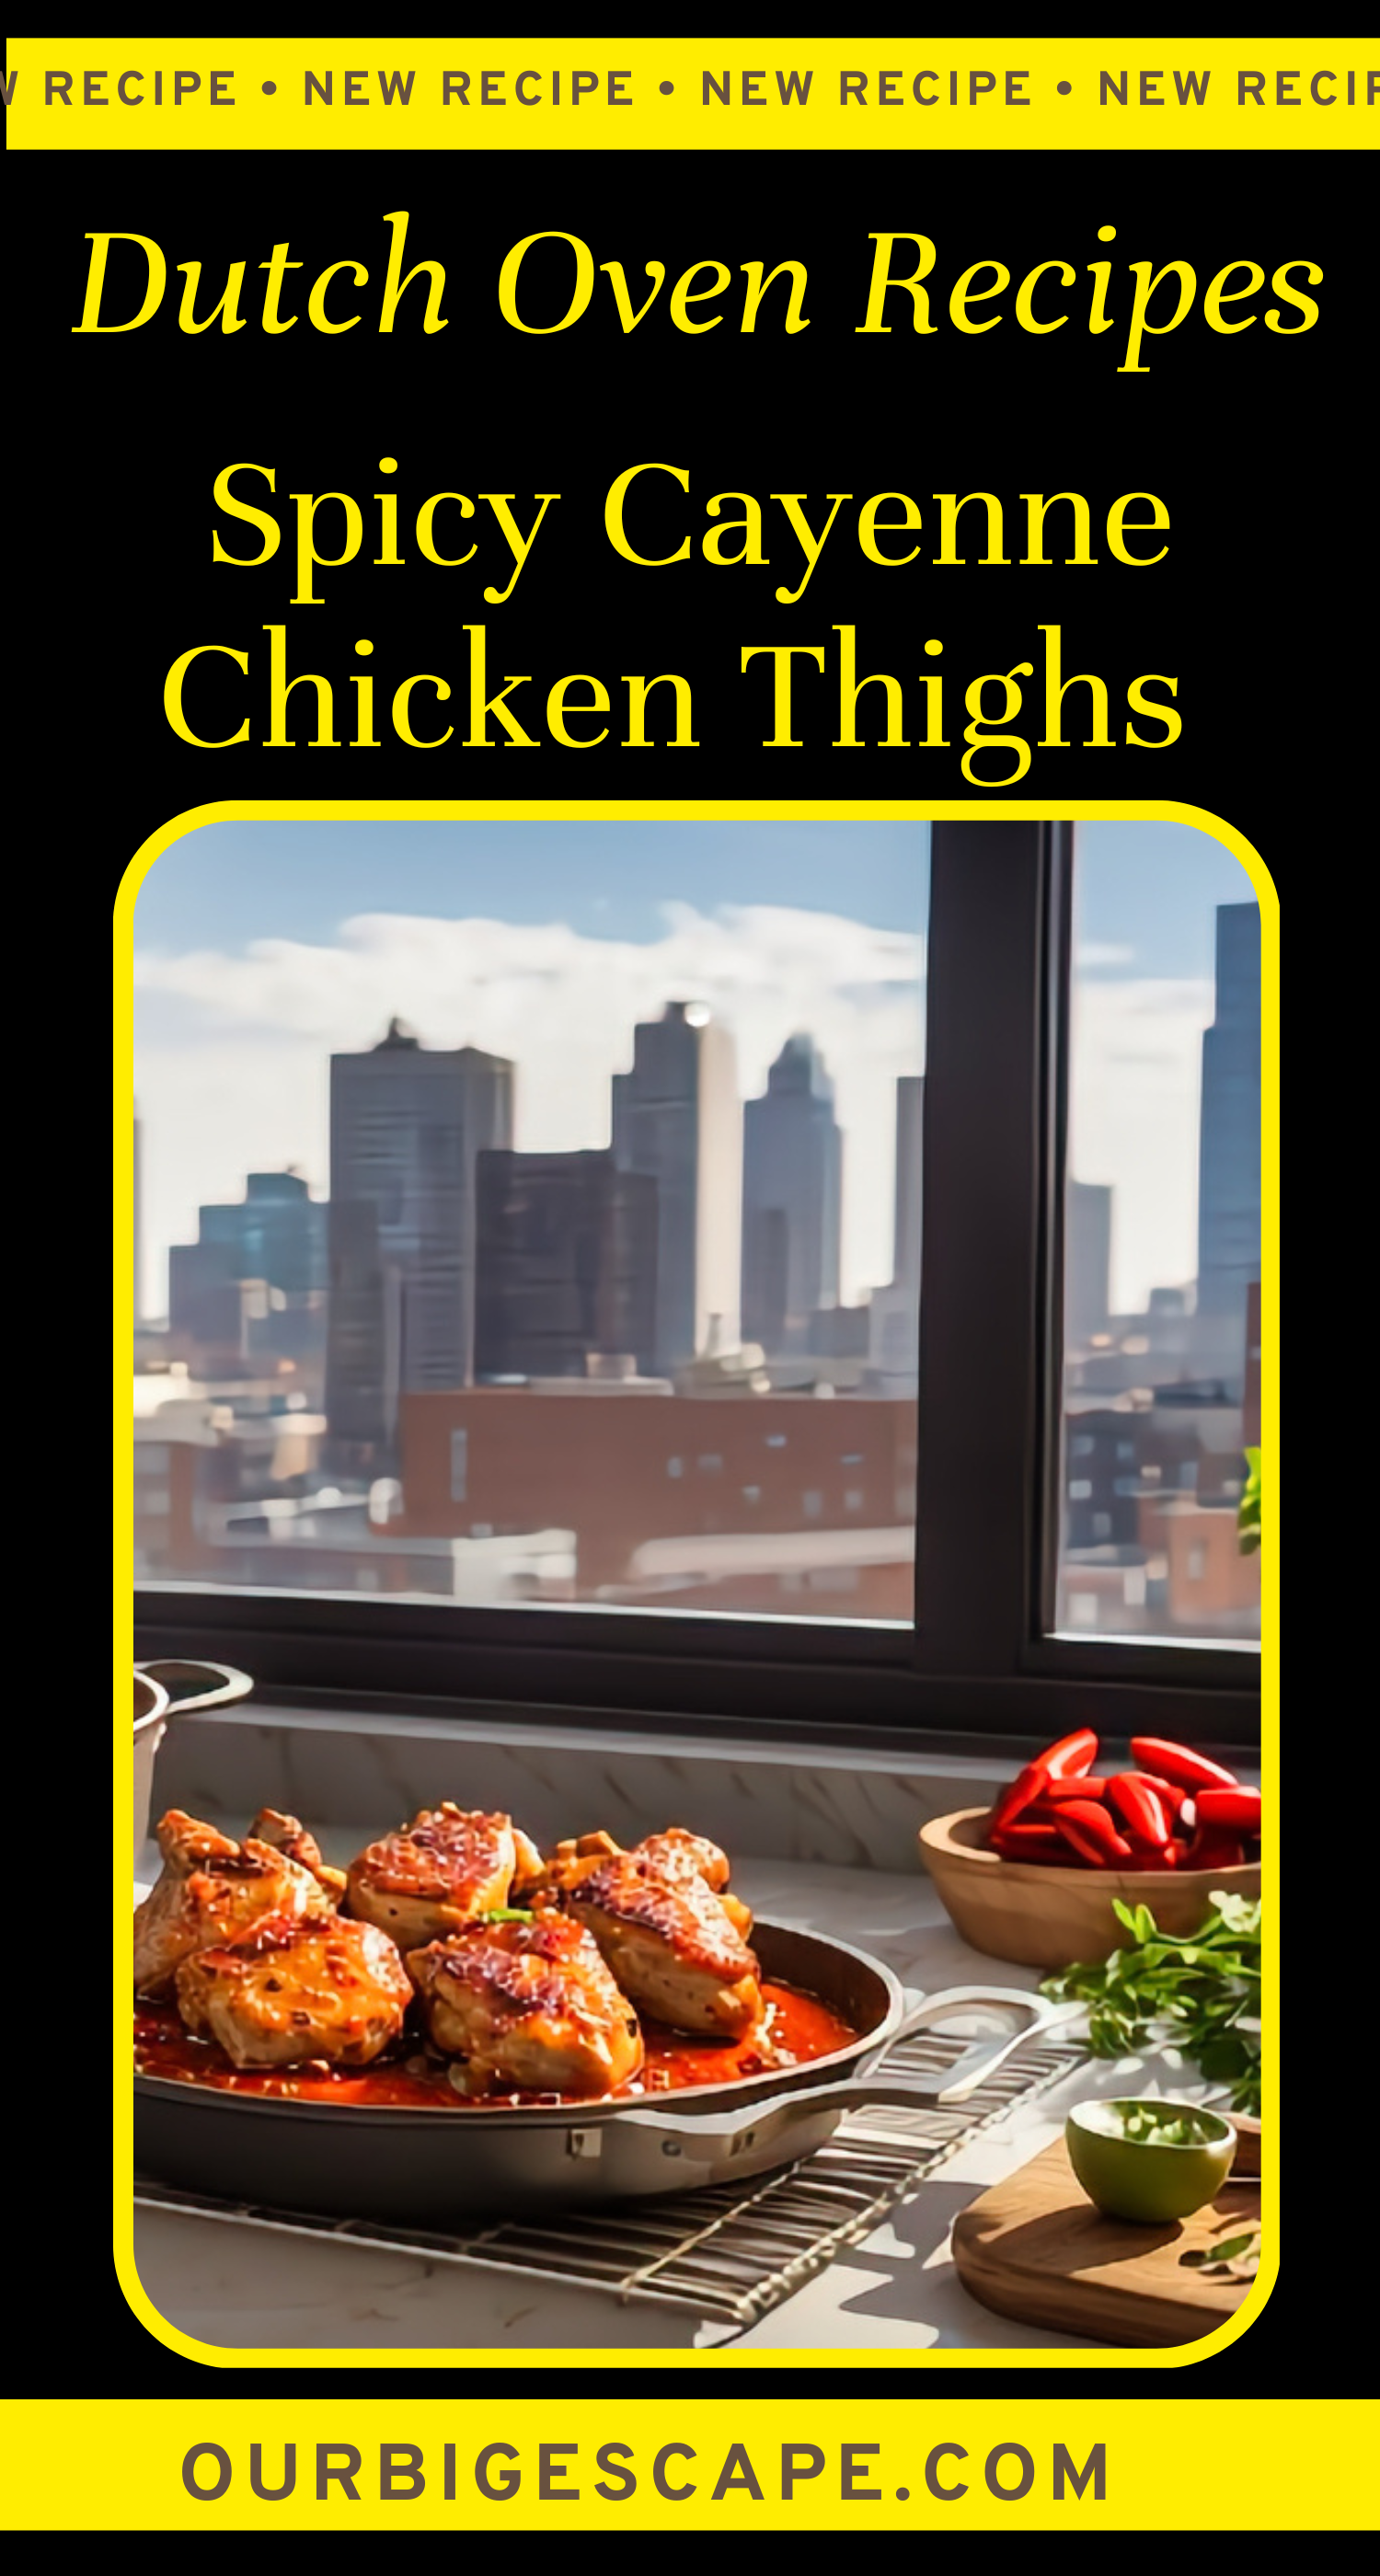 13. Dutch Oven Sweet and Spicy Cayenne Chicken Thighs Recipe